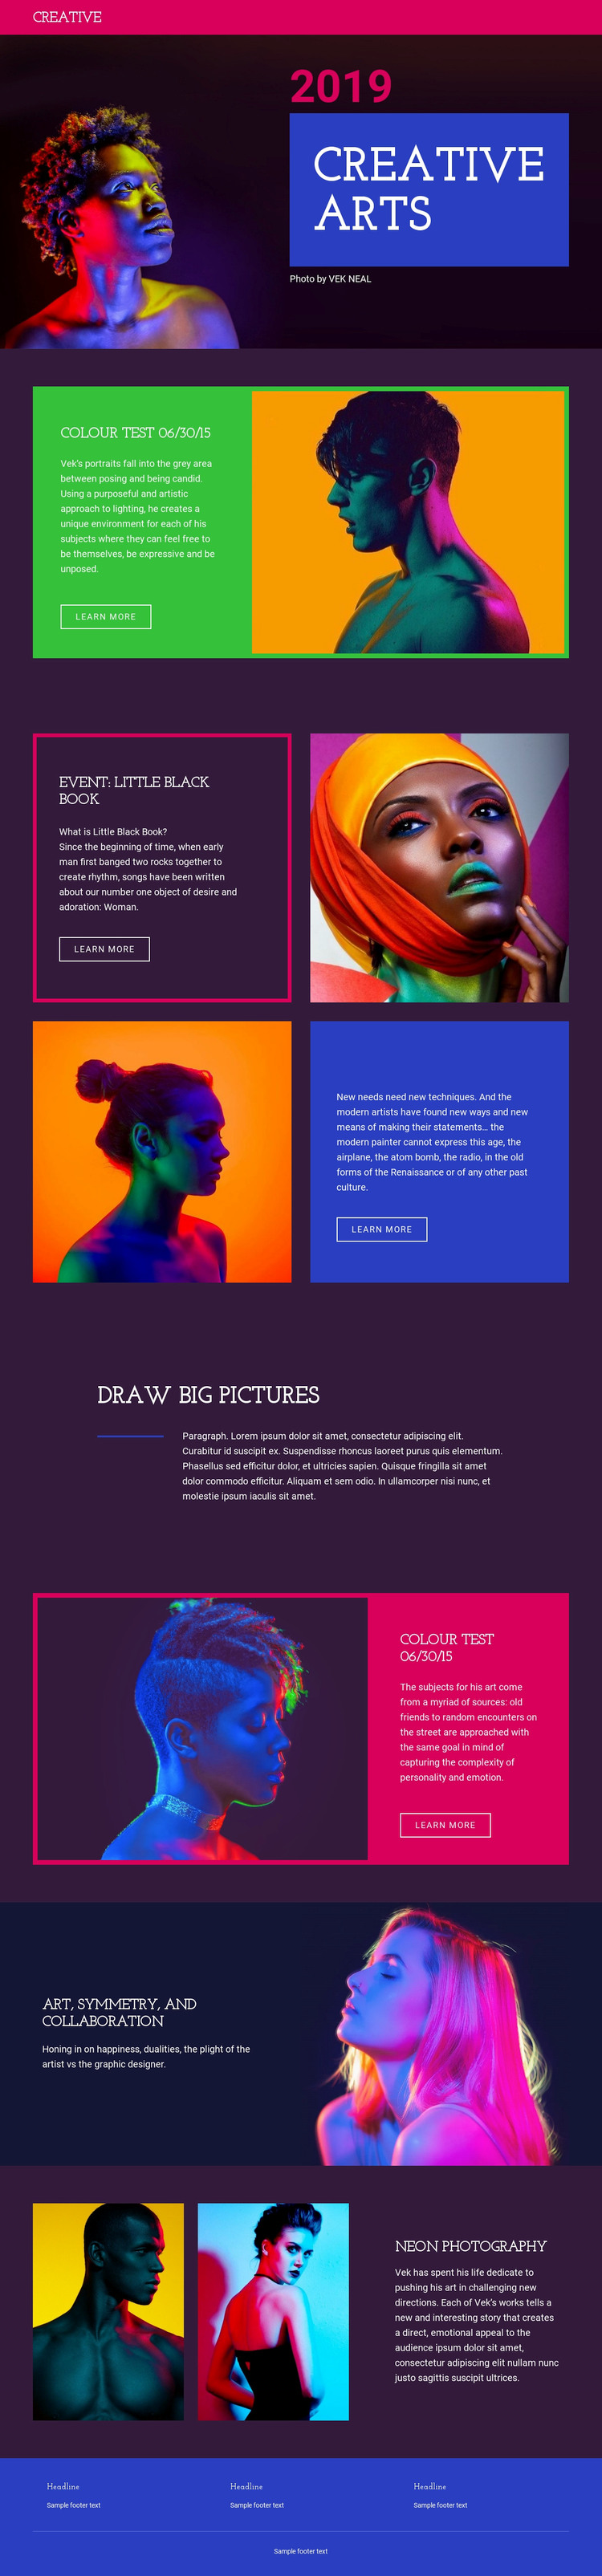 Limited-edition photography Elementor Template Alternative